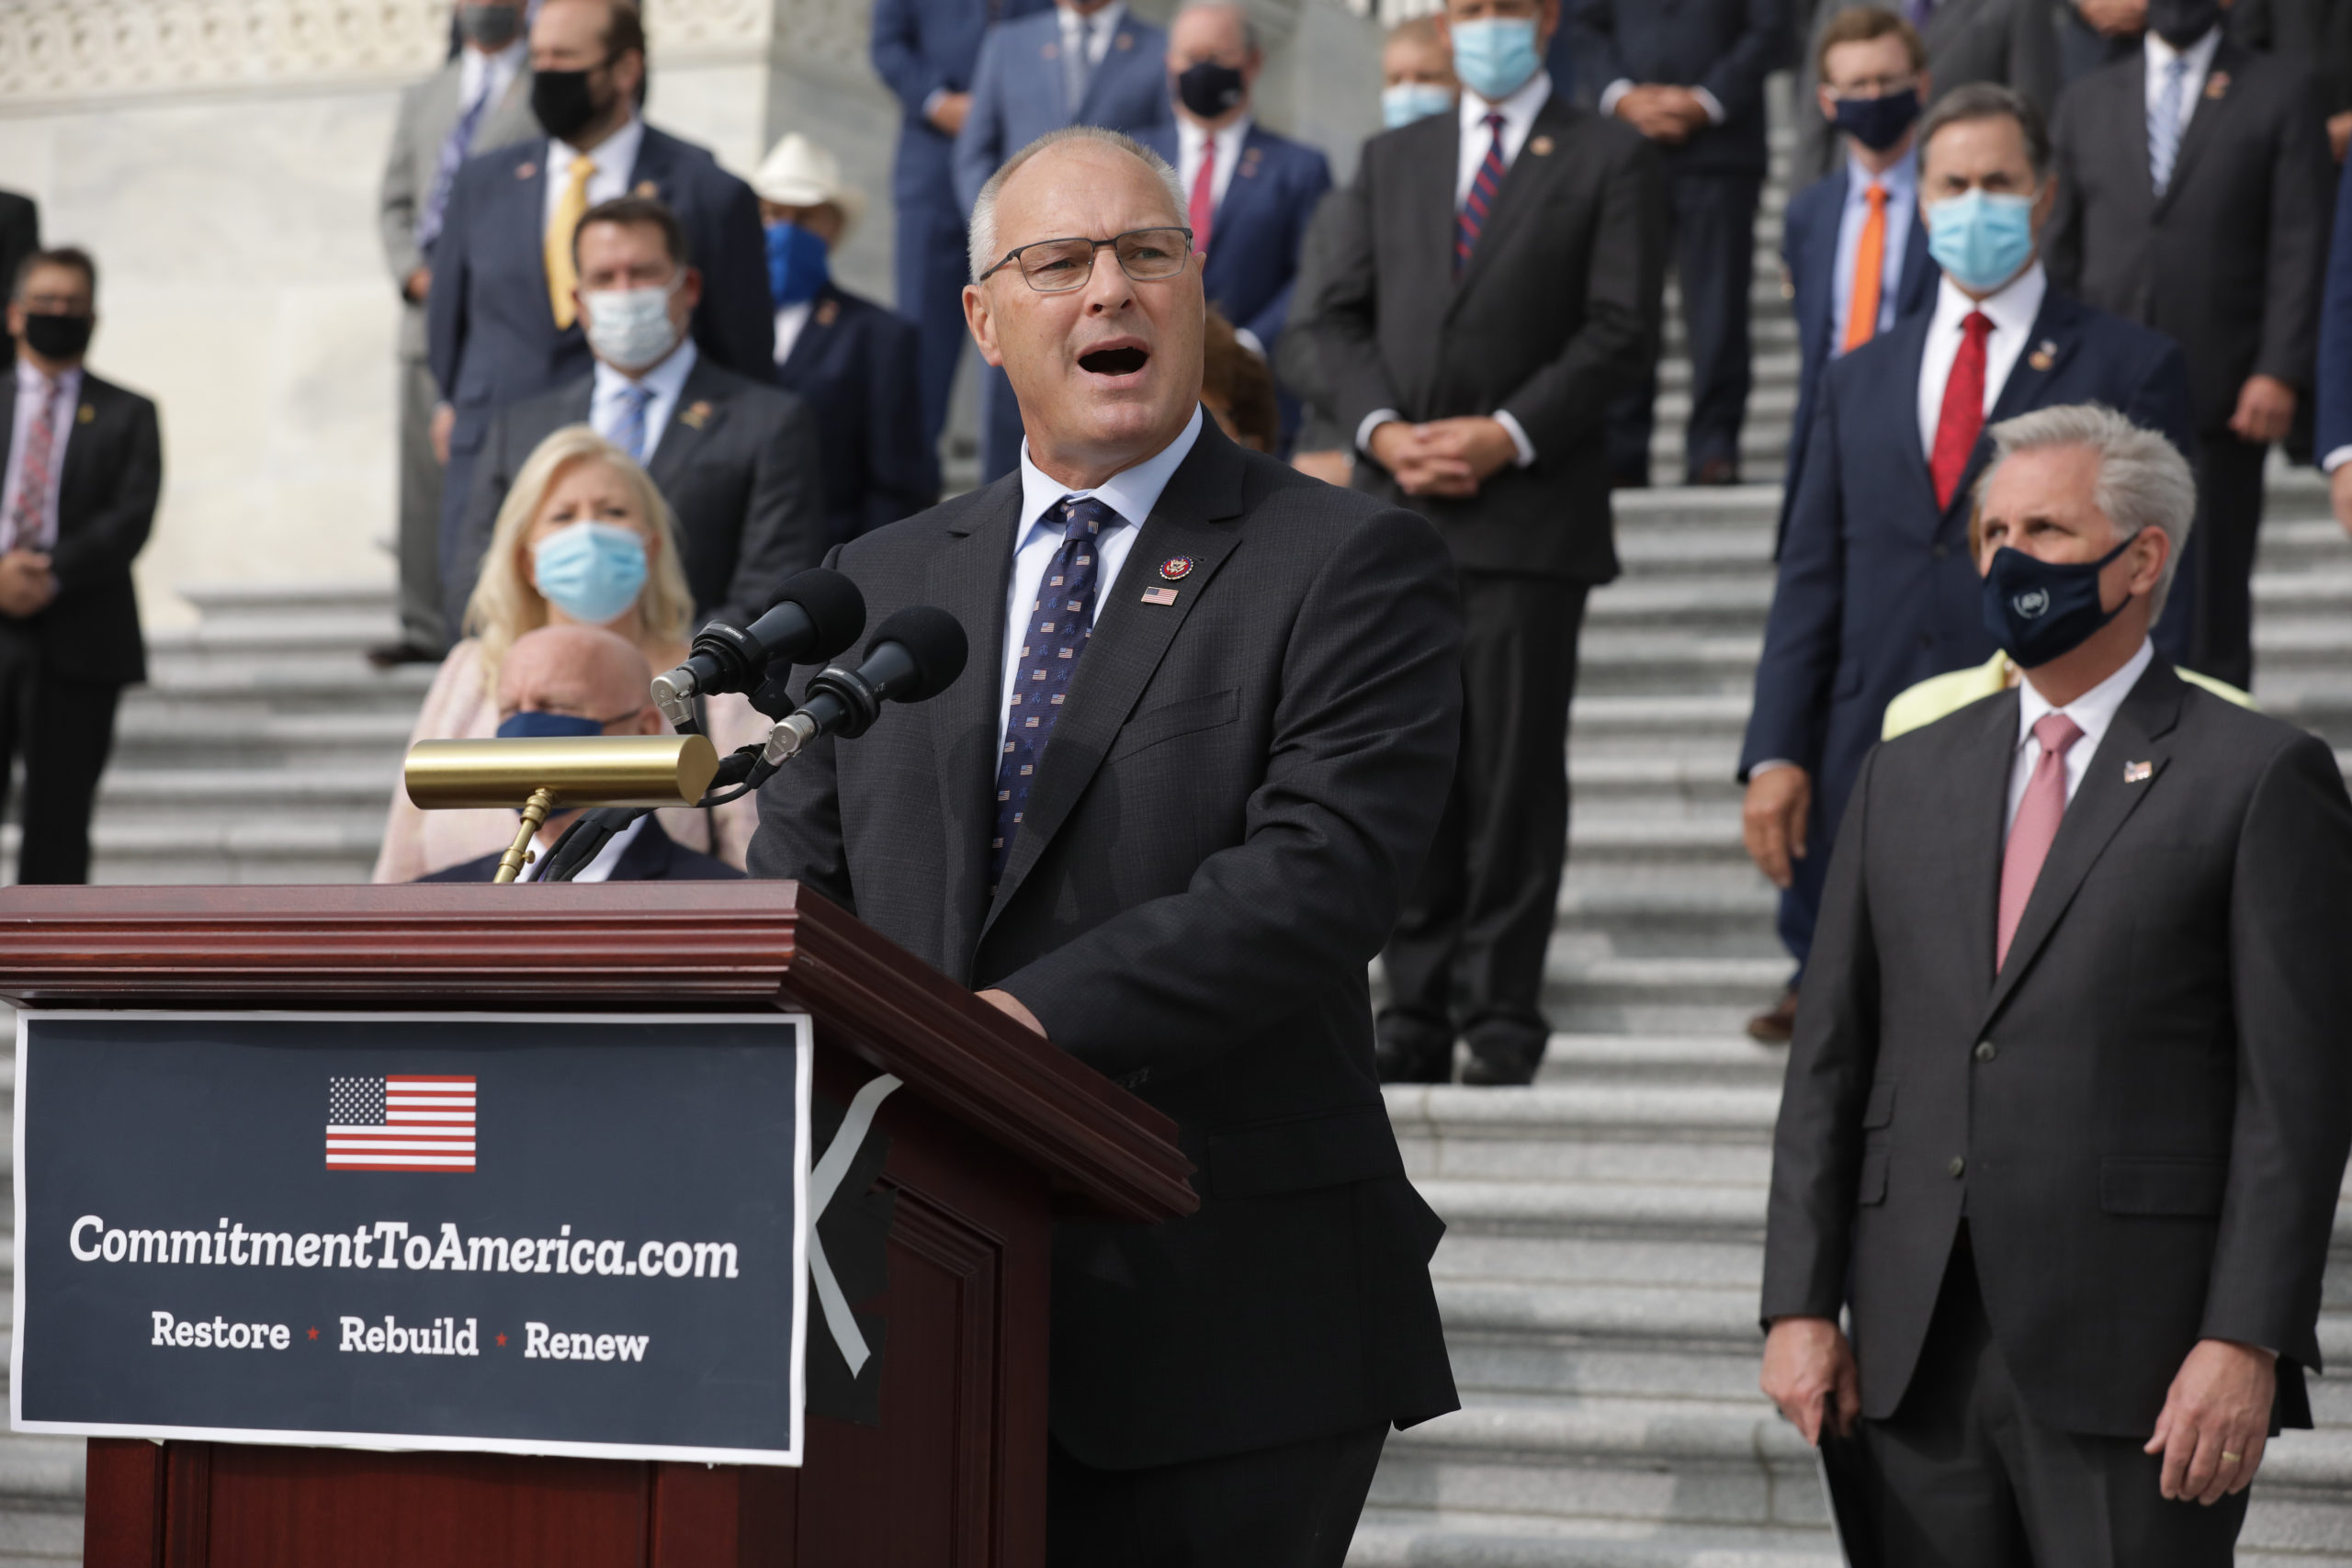 Rep. Pete Stauber joins fellow House Republicans while introducing their proposed legislative agenda in September 2020. (Chip Somodevilla/Getty Images)